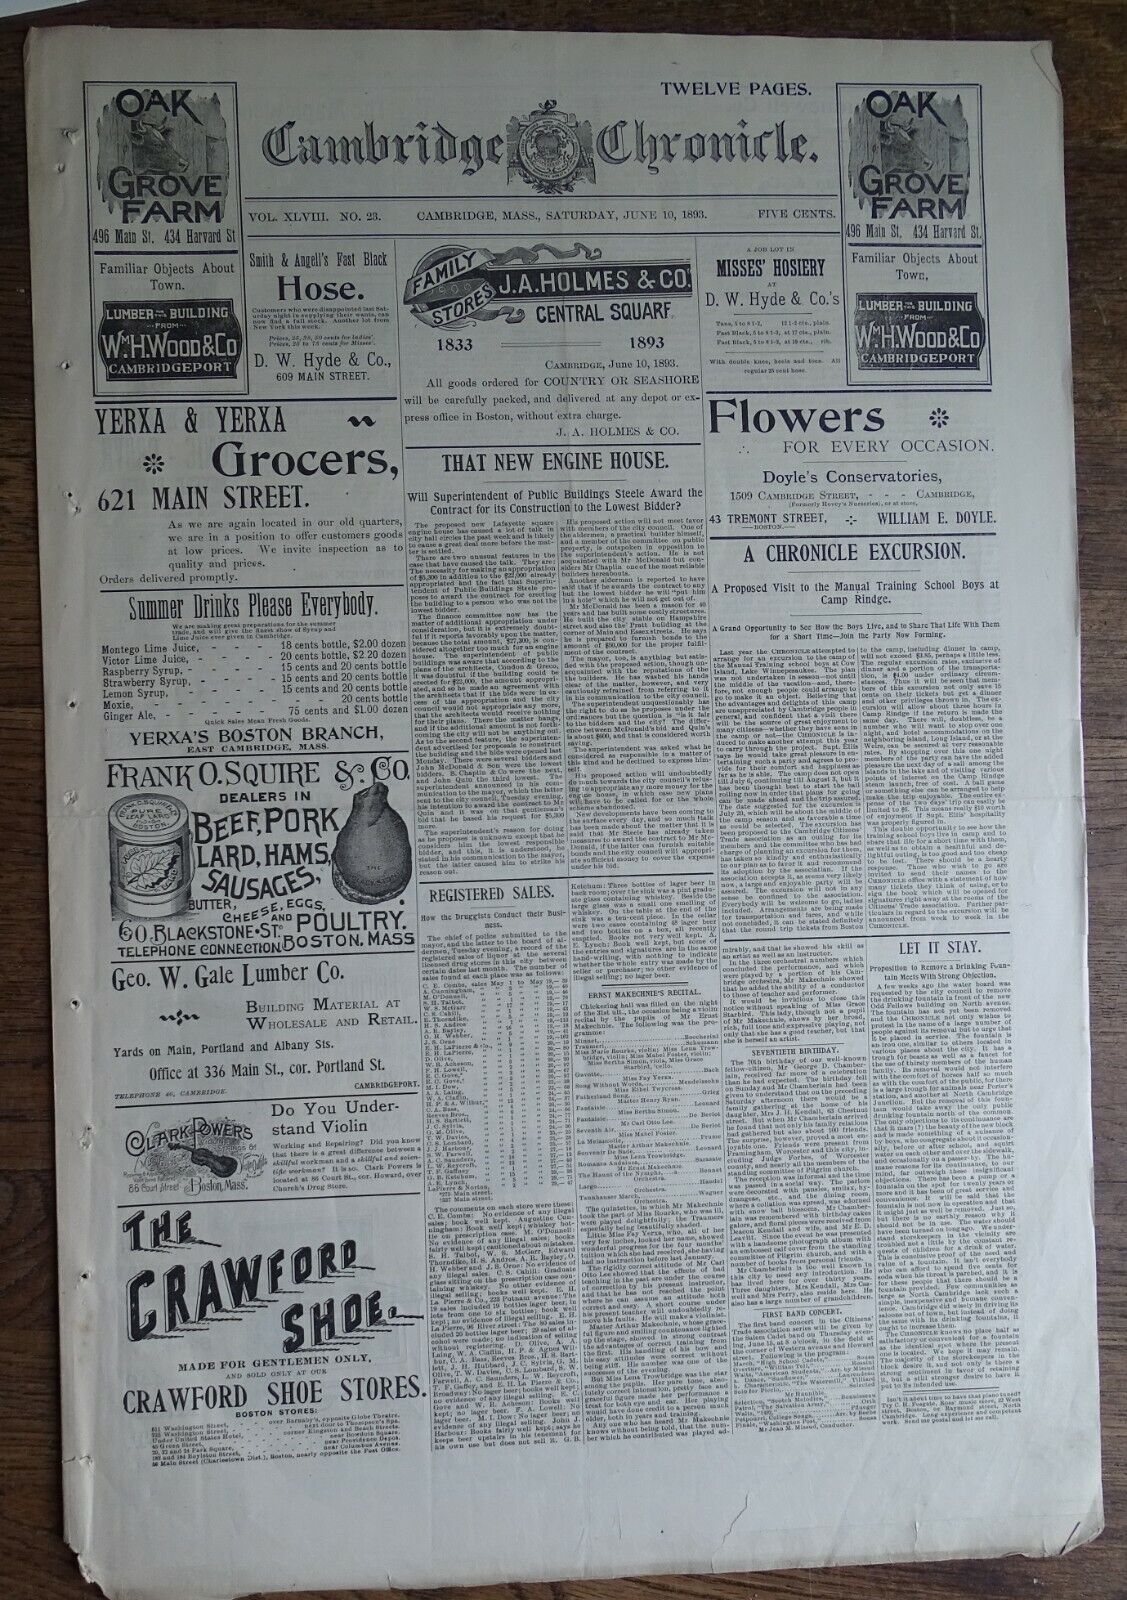 June 10 1893 Cambridge Chronicle Ma. Newspaper (only 8-pages) Camp Rindge etc.